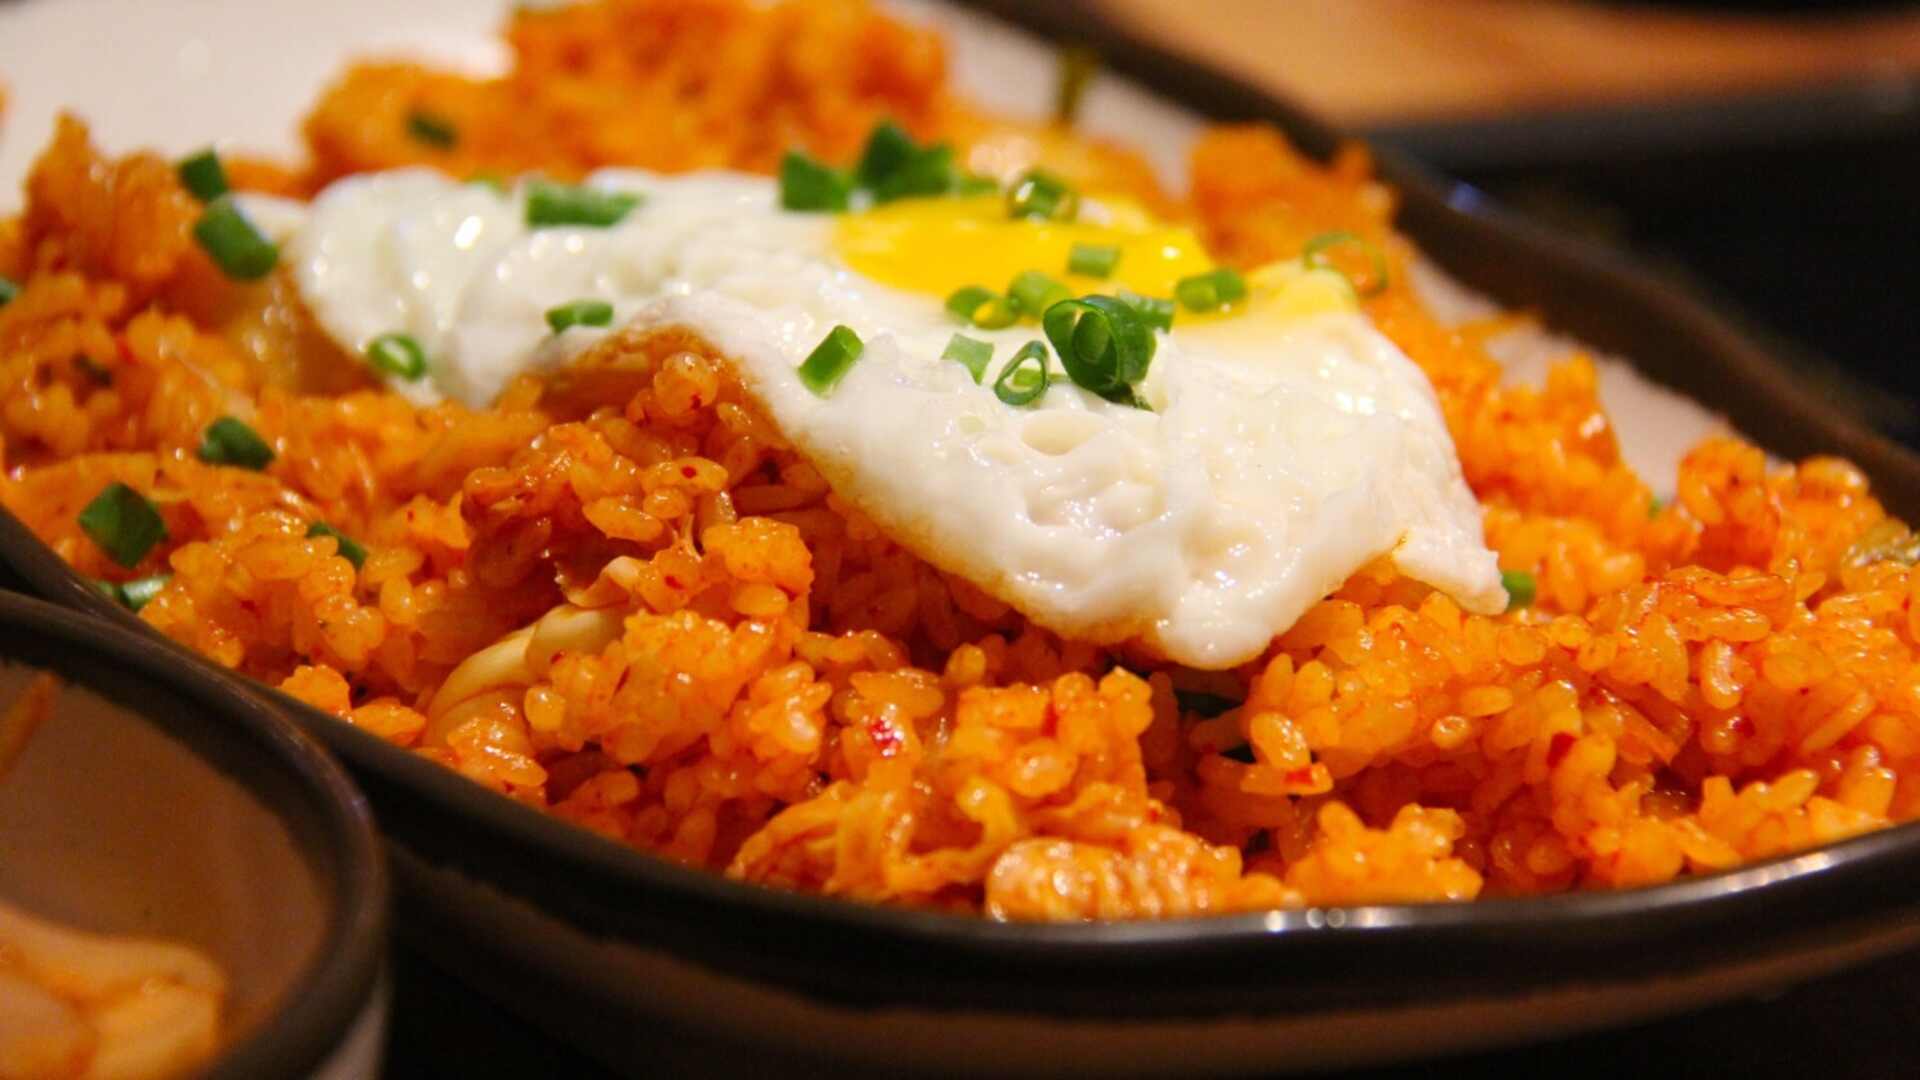 Kimchi fried rice is a popular dish in South Korea